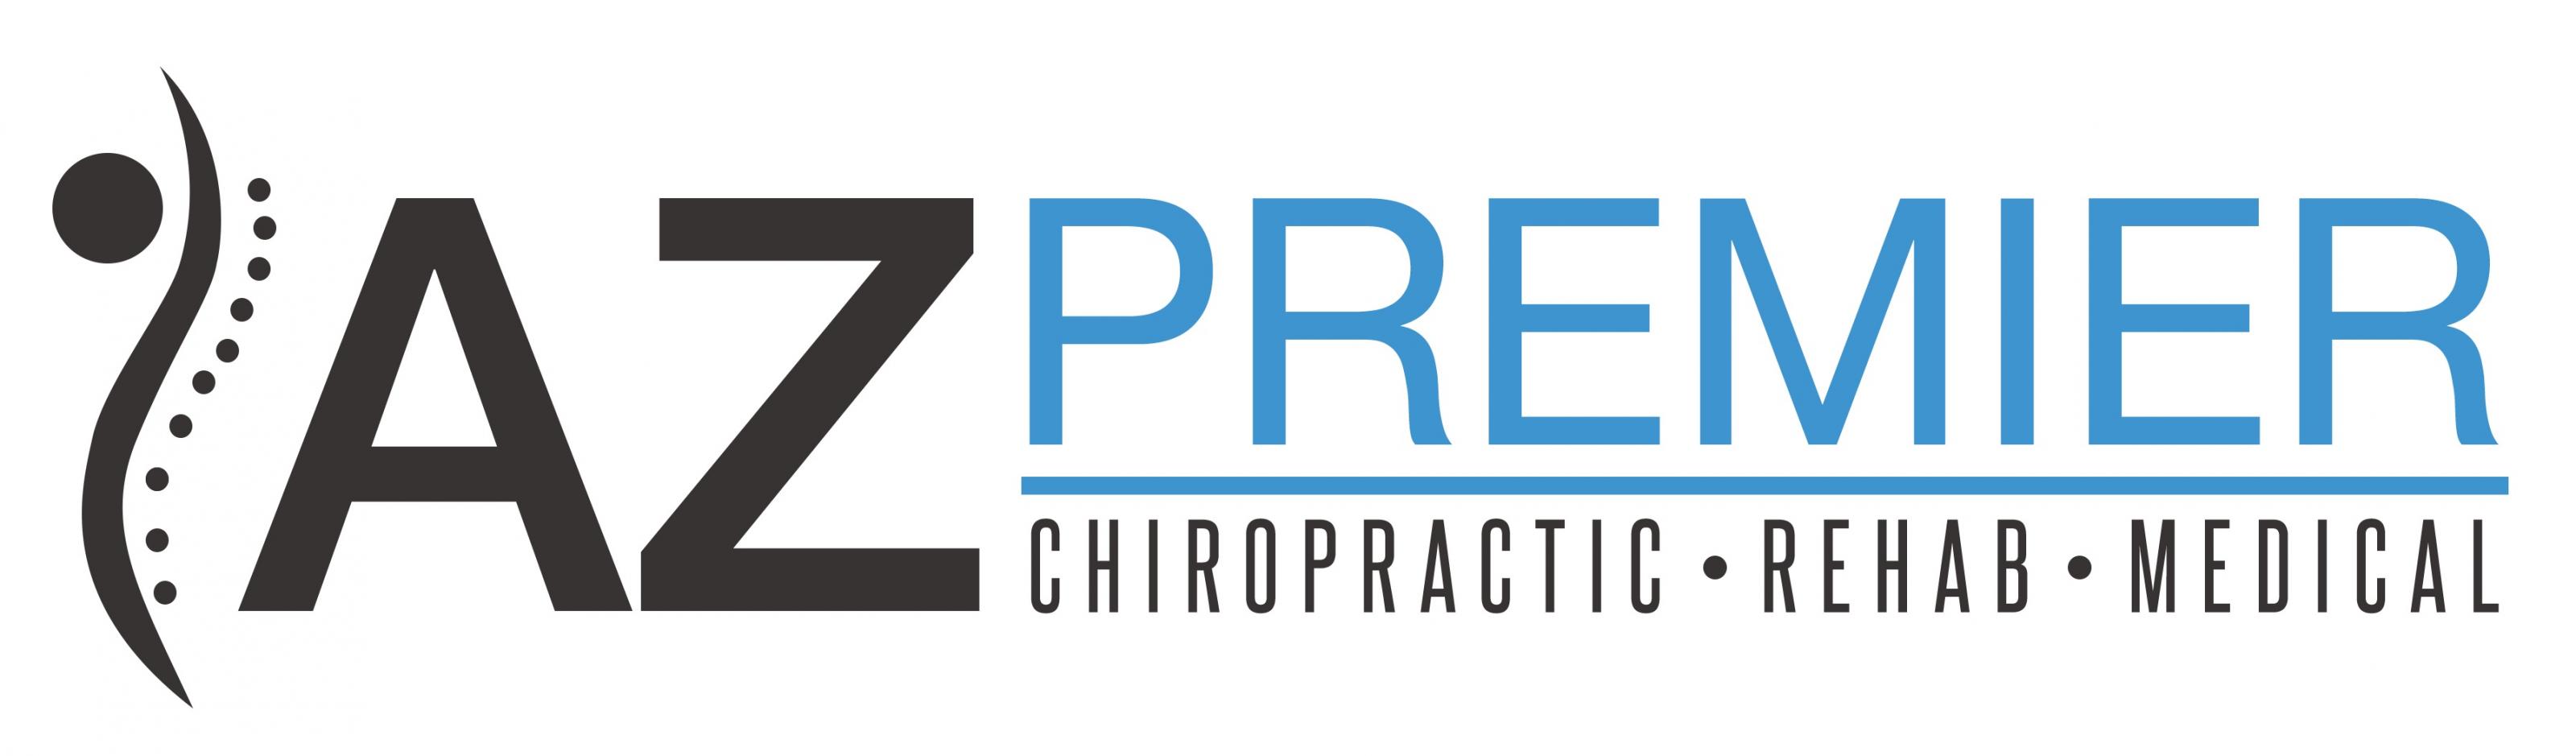 Best Whiplash Treatment From AZ Premier Chiropractic and Rehab